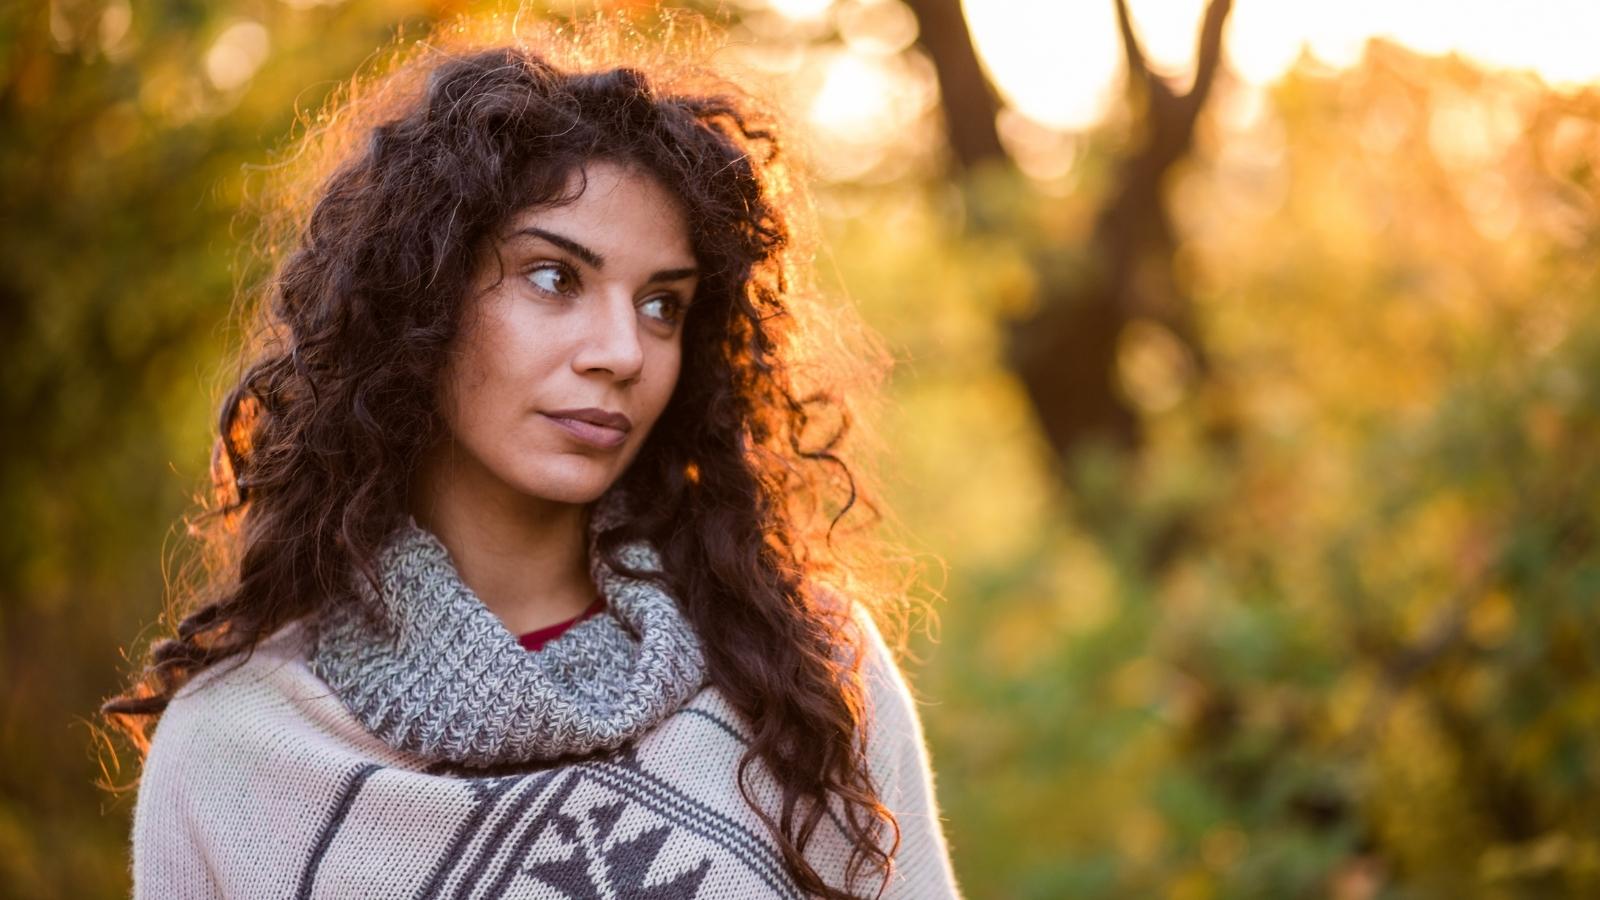 Seasonal Hair Loss: How to Deal With Autumn Shedding